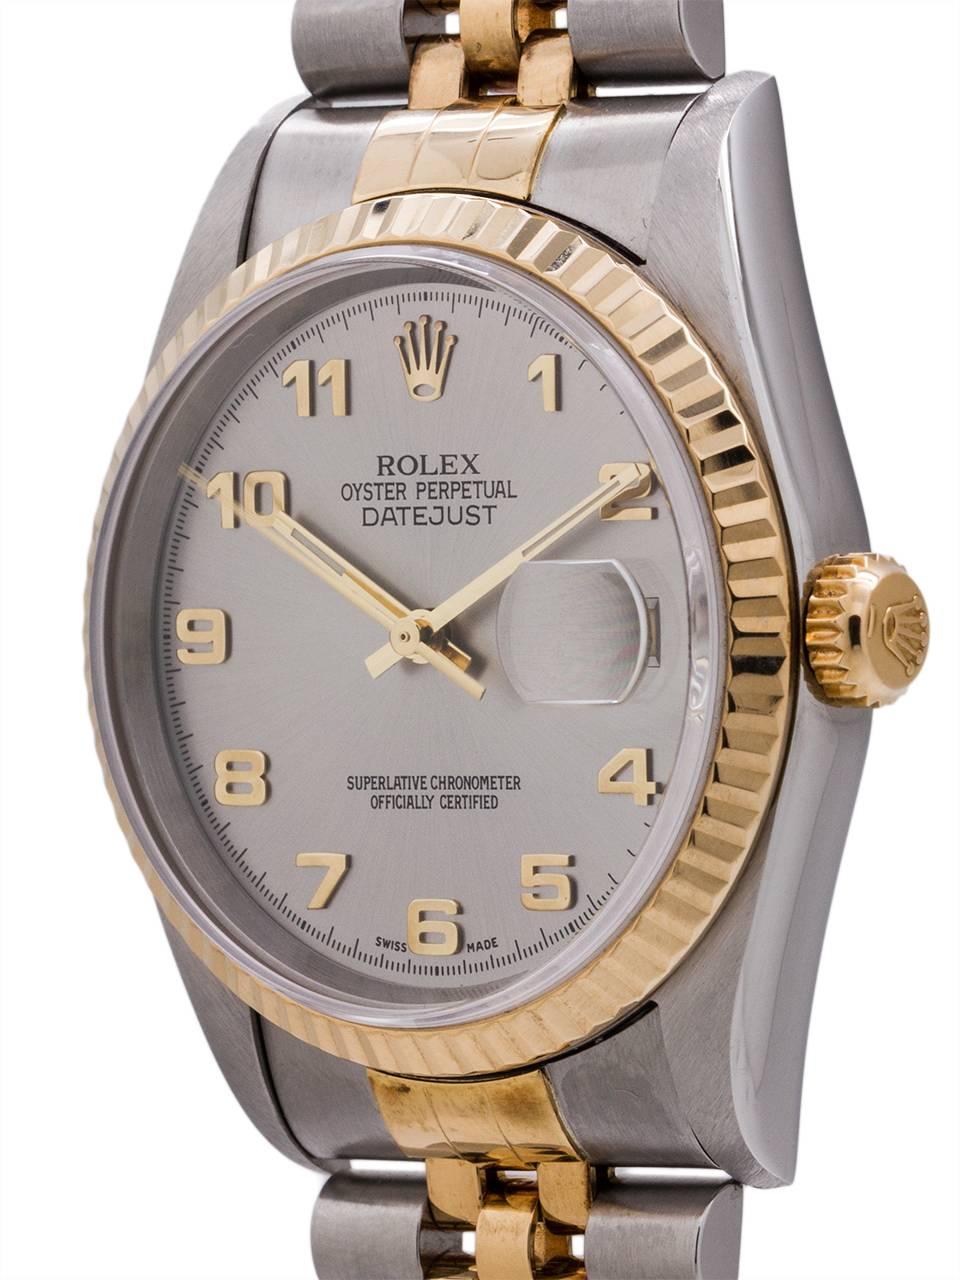 
Man’s Rolex Datejust ref 16233 stainless steel and 18K gold V serial# circa 1998. Featuring 36mm diameter case with 18K YG fluted bezel, sapphire crystal, and very popular original “Arabic Rhodium” dial with gray metallic background and bold gold